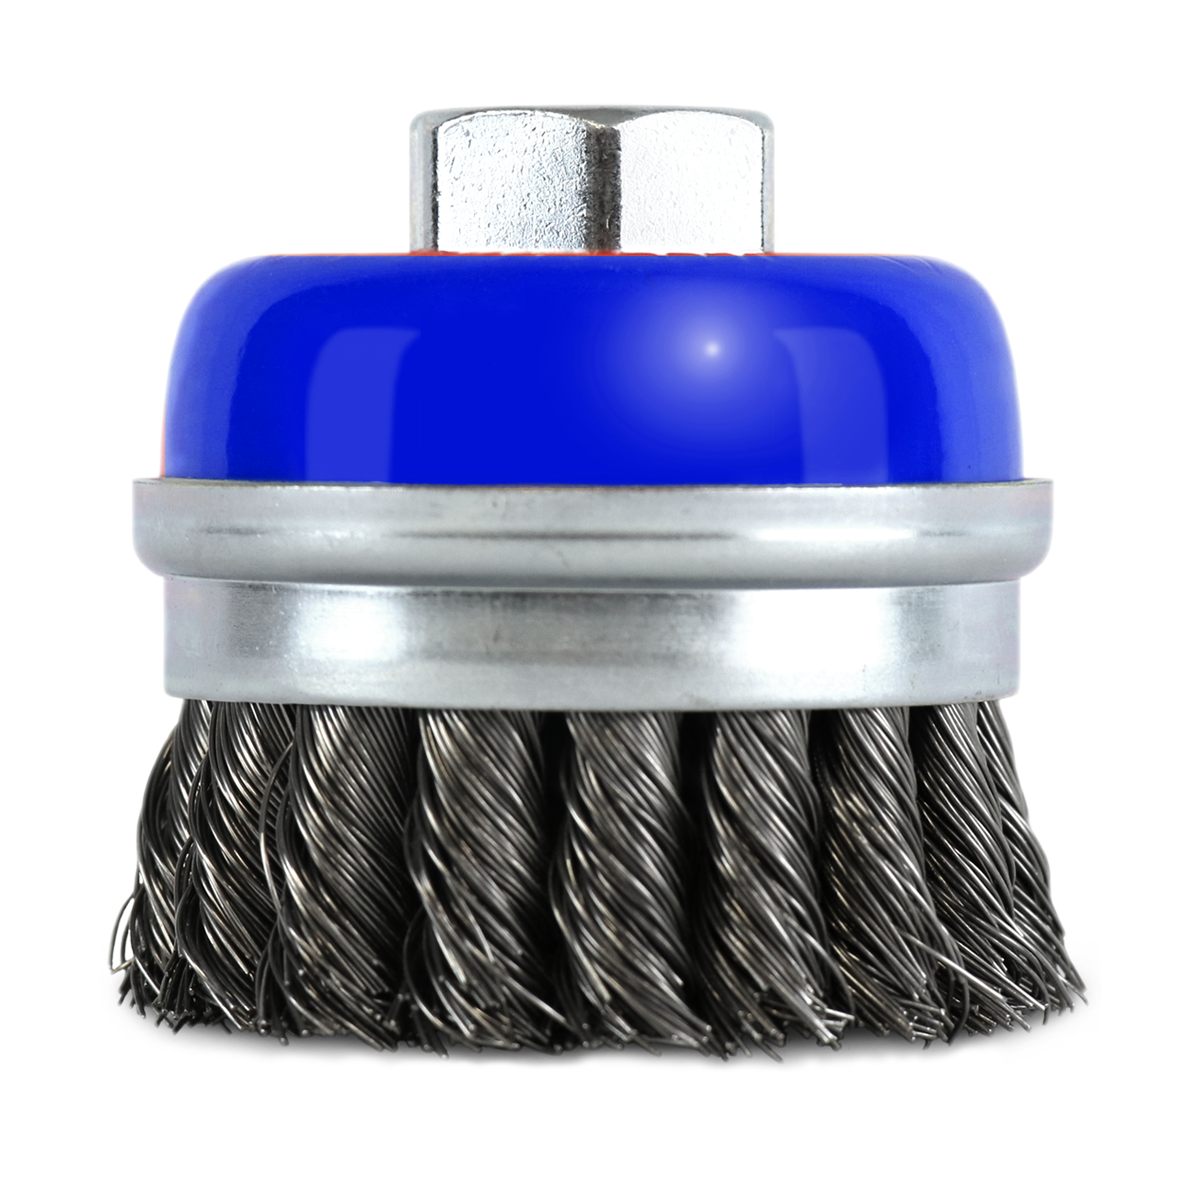 Item # C1697, Cleaning & Conditioning Wire Cup Brush On Flexovit USA, Inc.